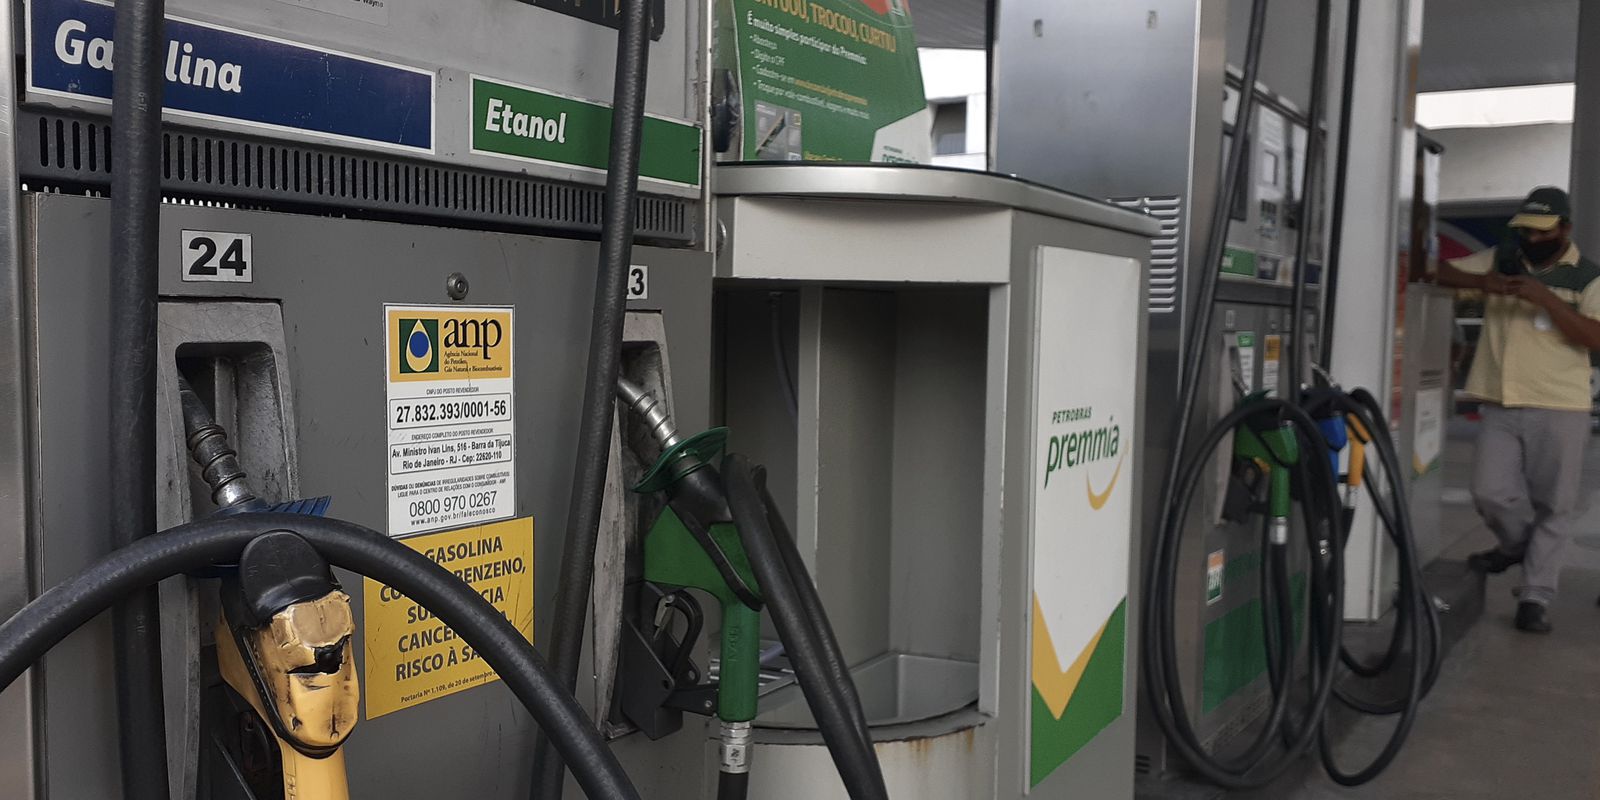 Stations must display fuel prices to two decimal places